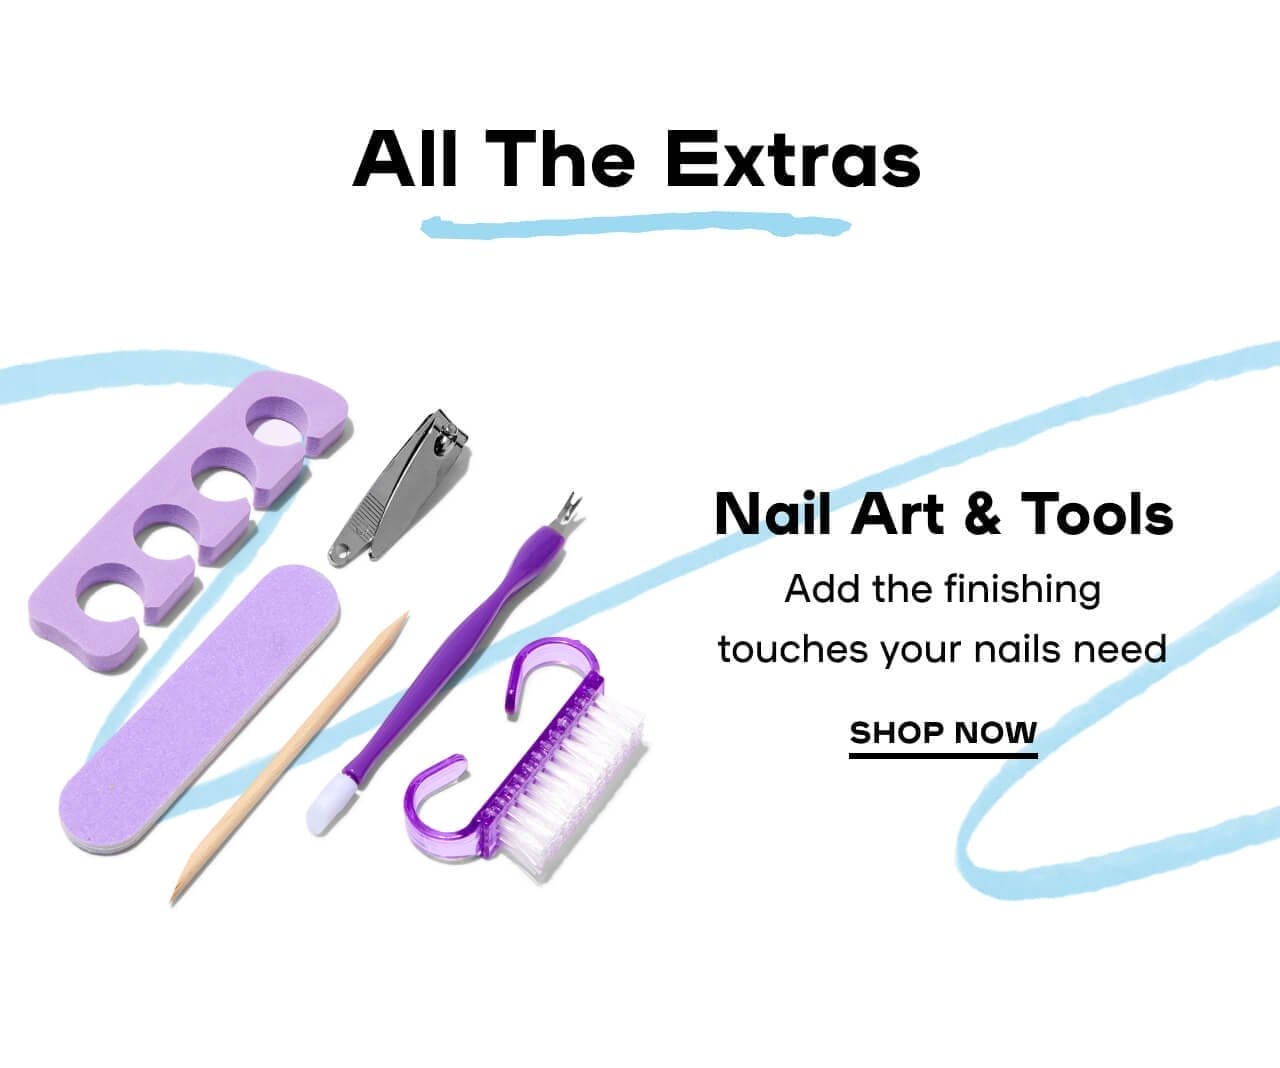 All The Extras Nail Art & Tools Add the finishing touches your nails need